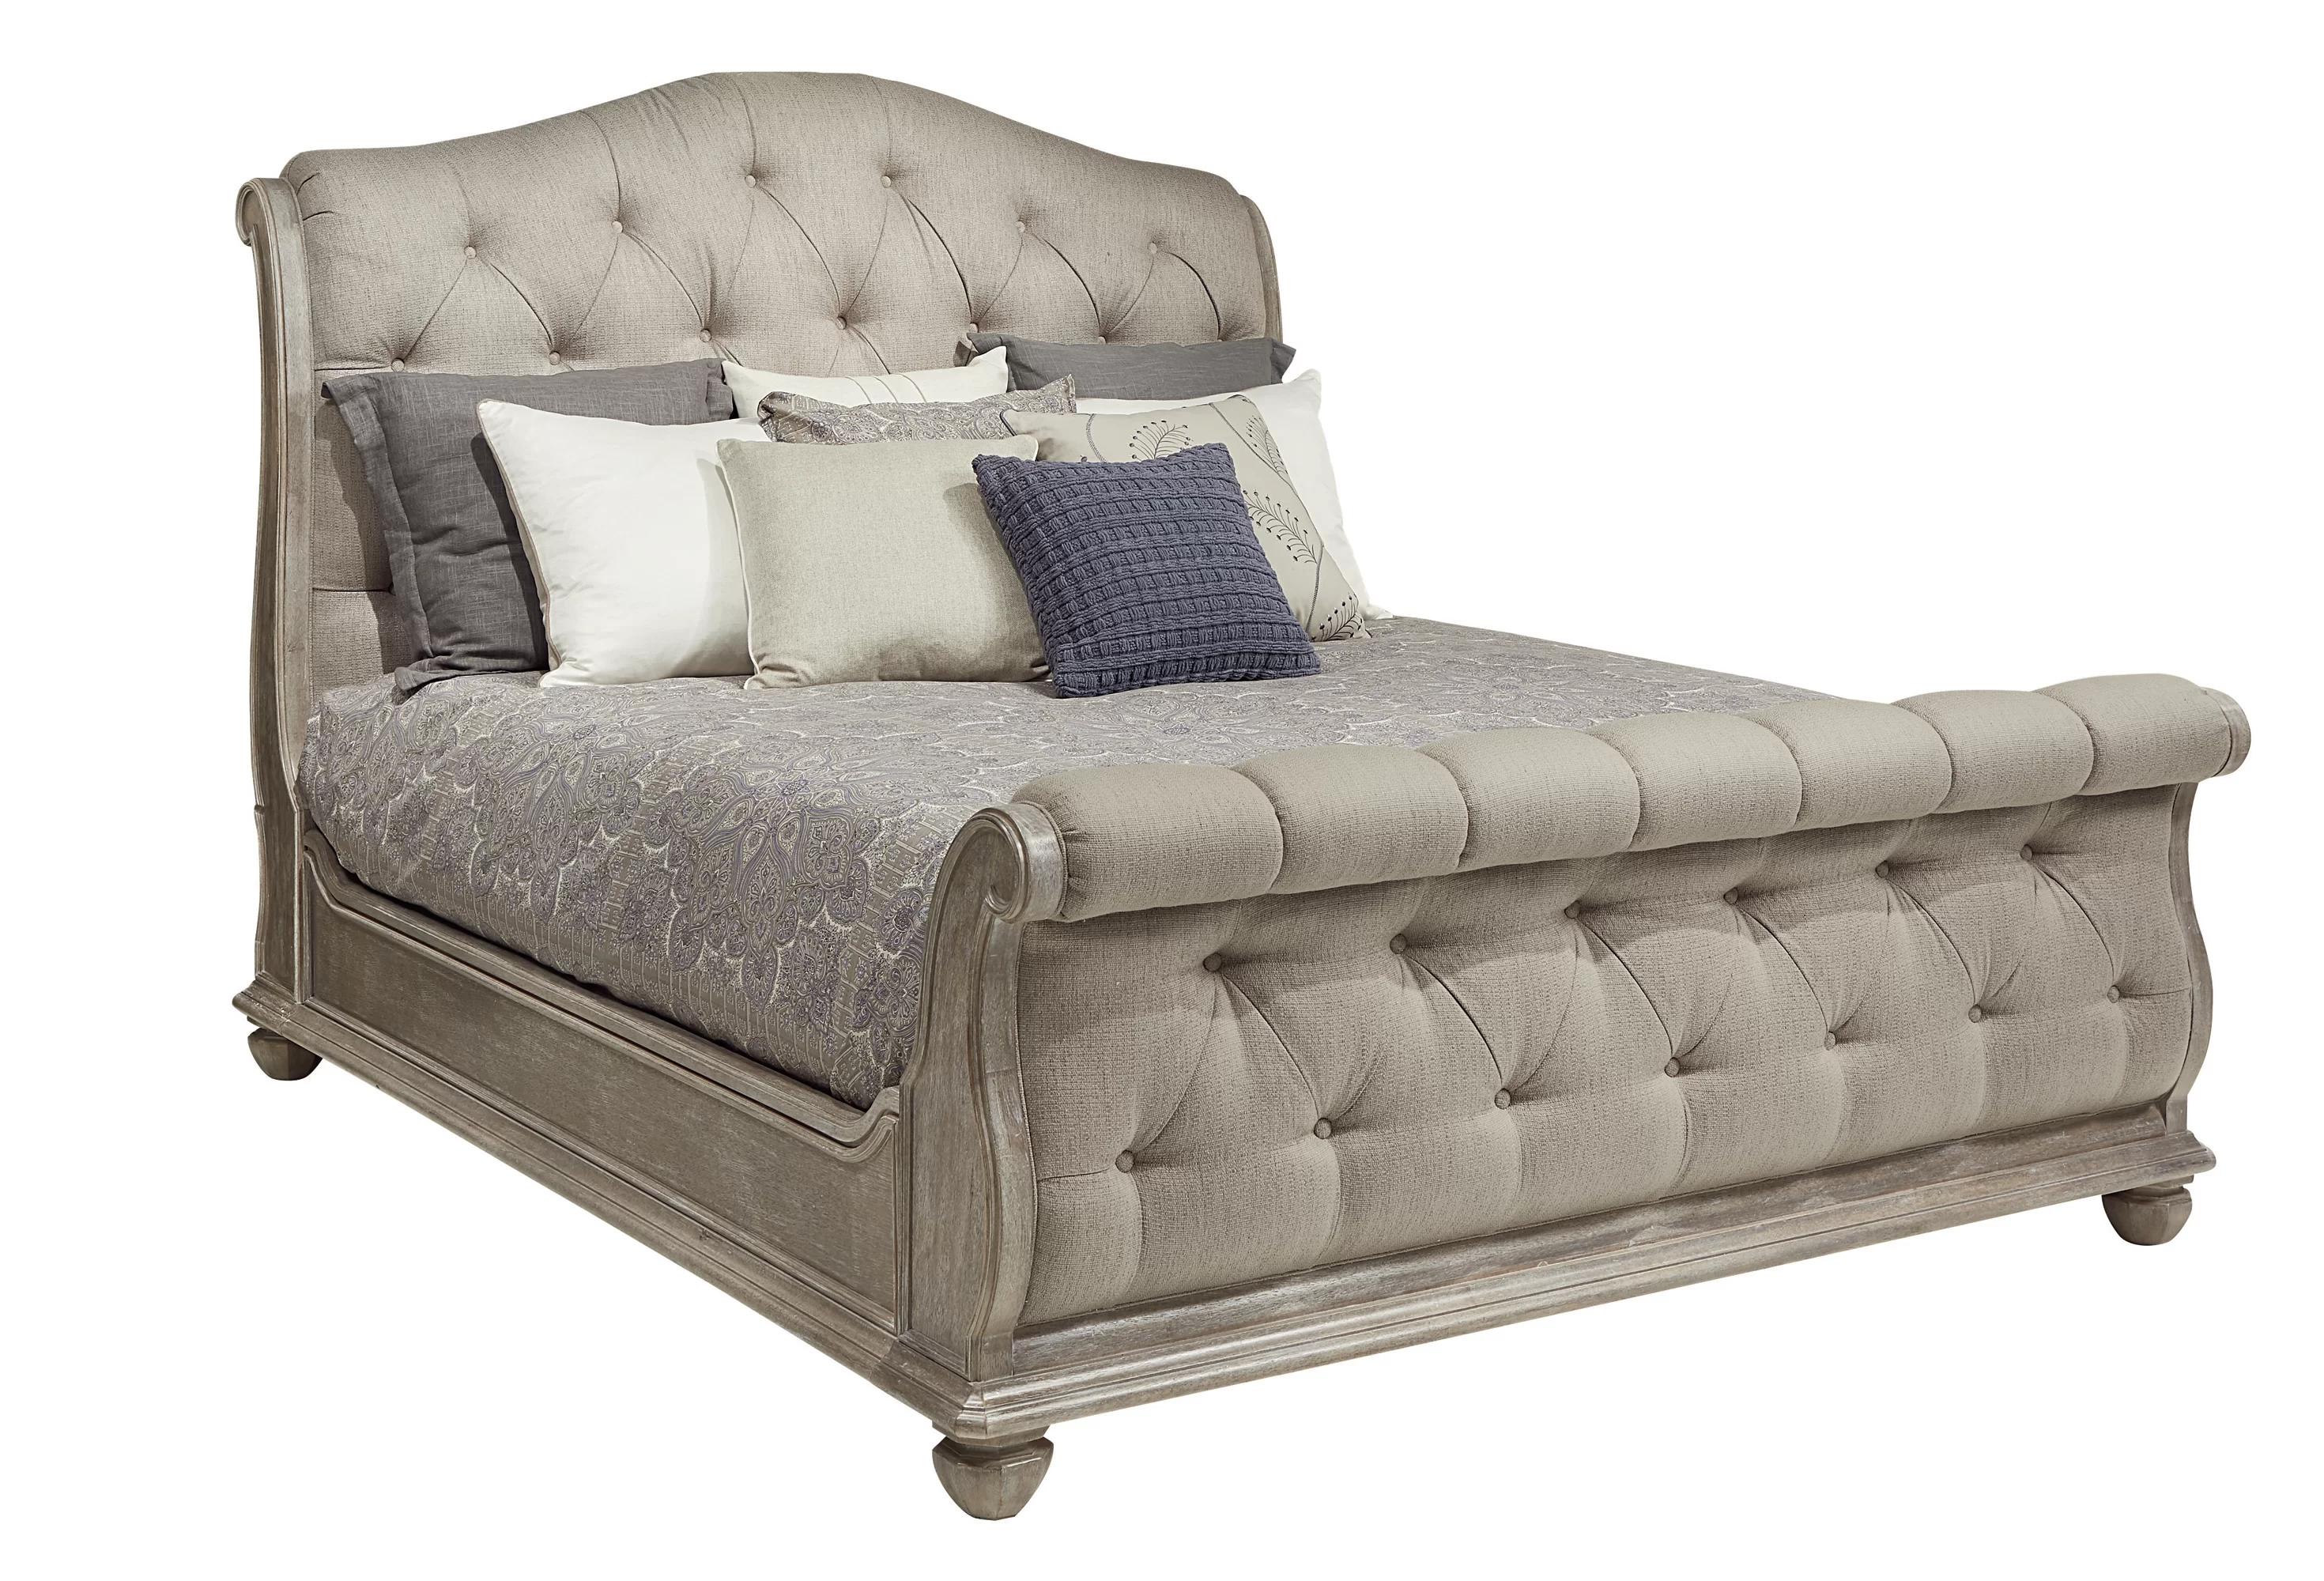 Classic, Traditional Sleigh Bed Summer Creek 251127-1303 in Wash Oak, Beige Fabric